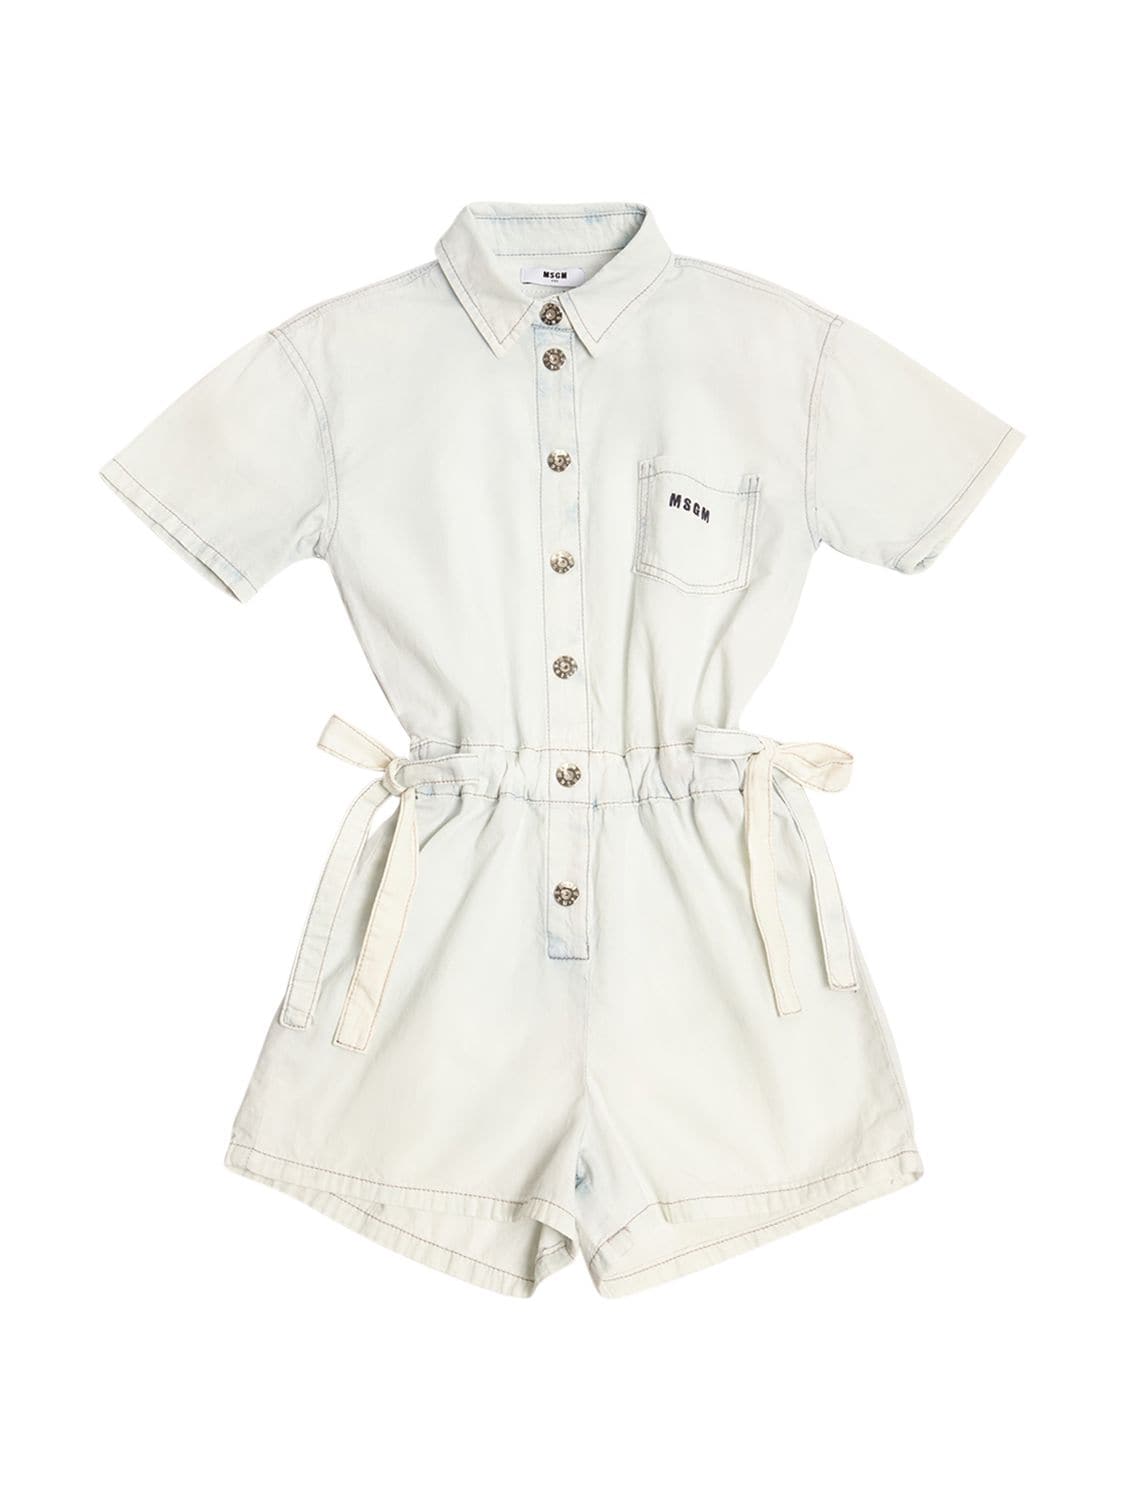 Msgm Kids' Cotton Chambray Jumpsuit In Light Blue